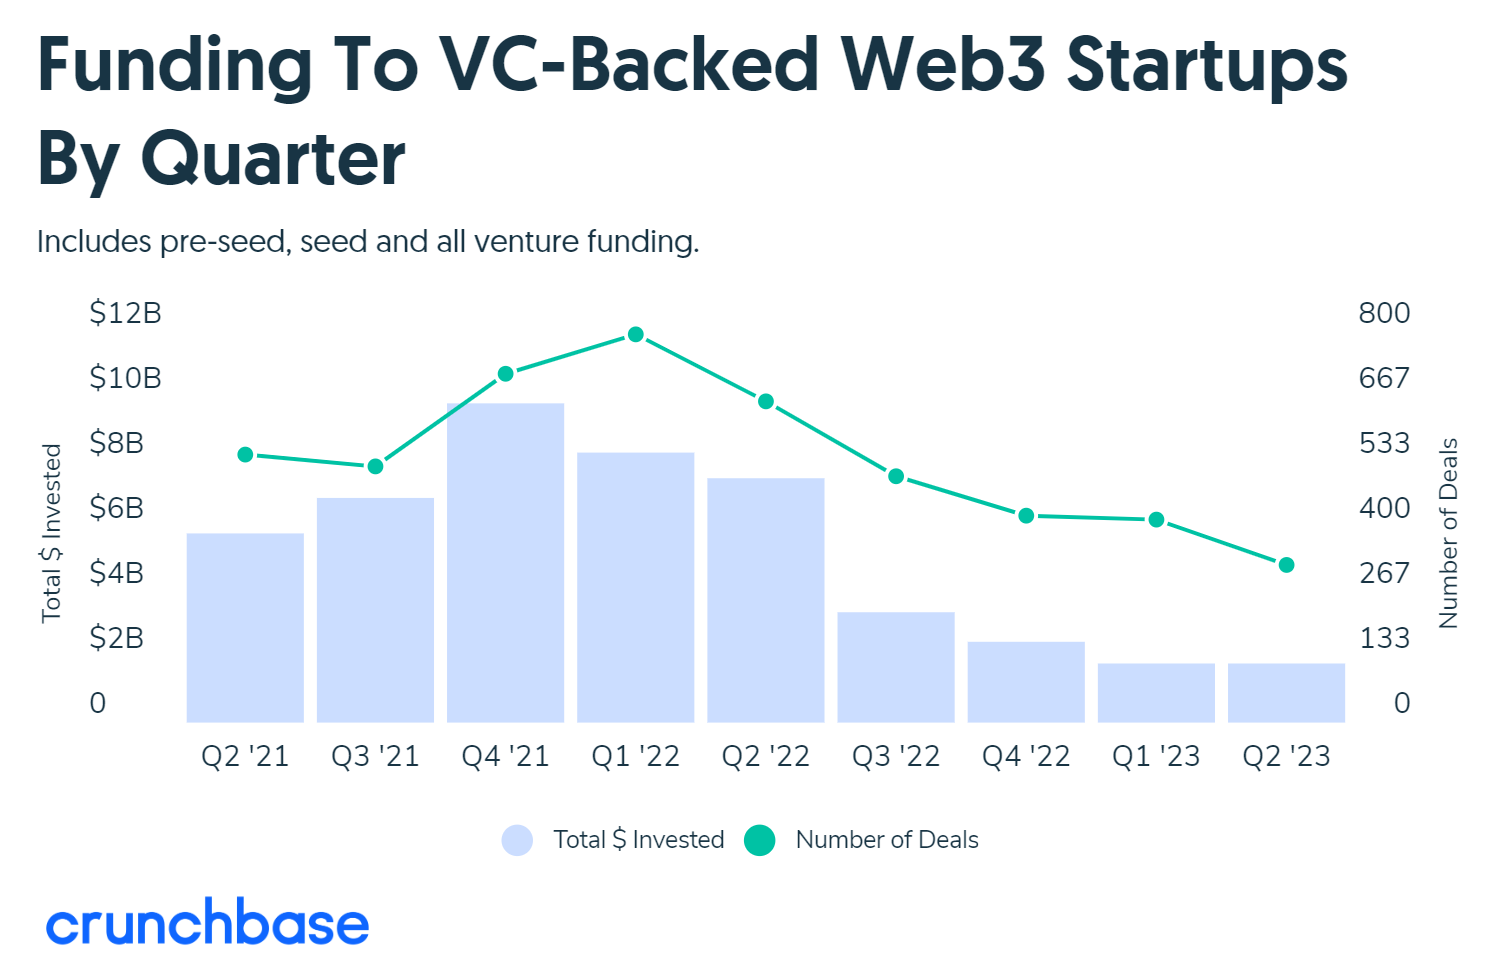 Decline in investments in VC-backed Web3 Startups